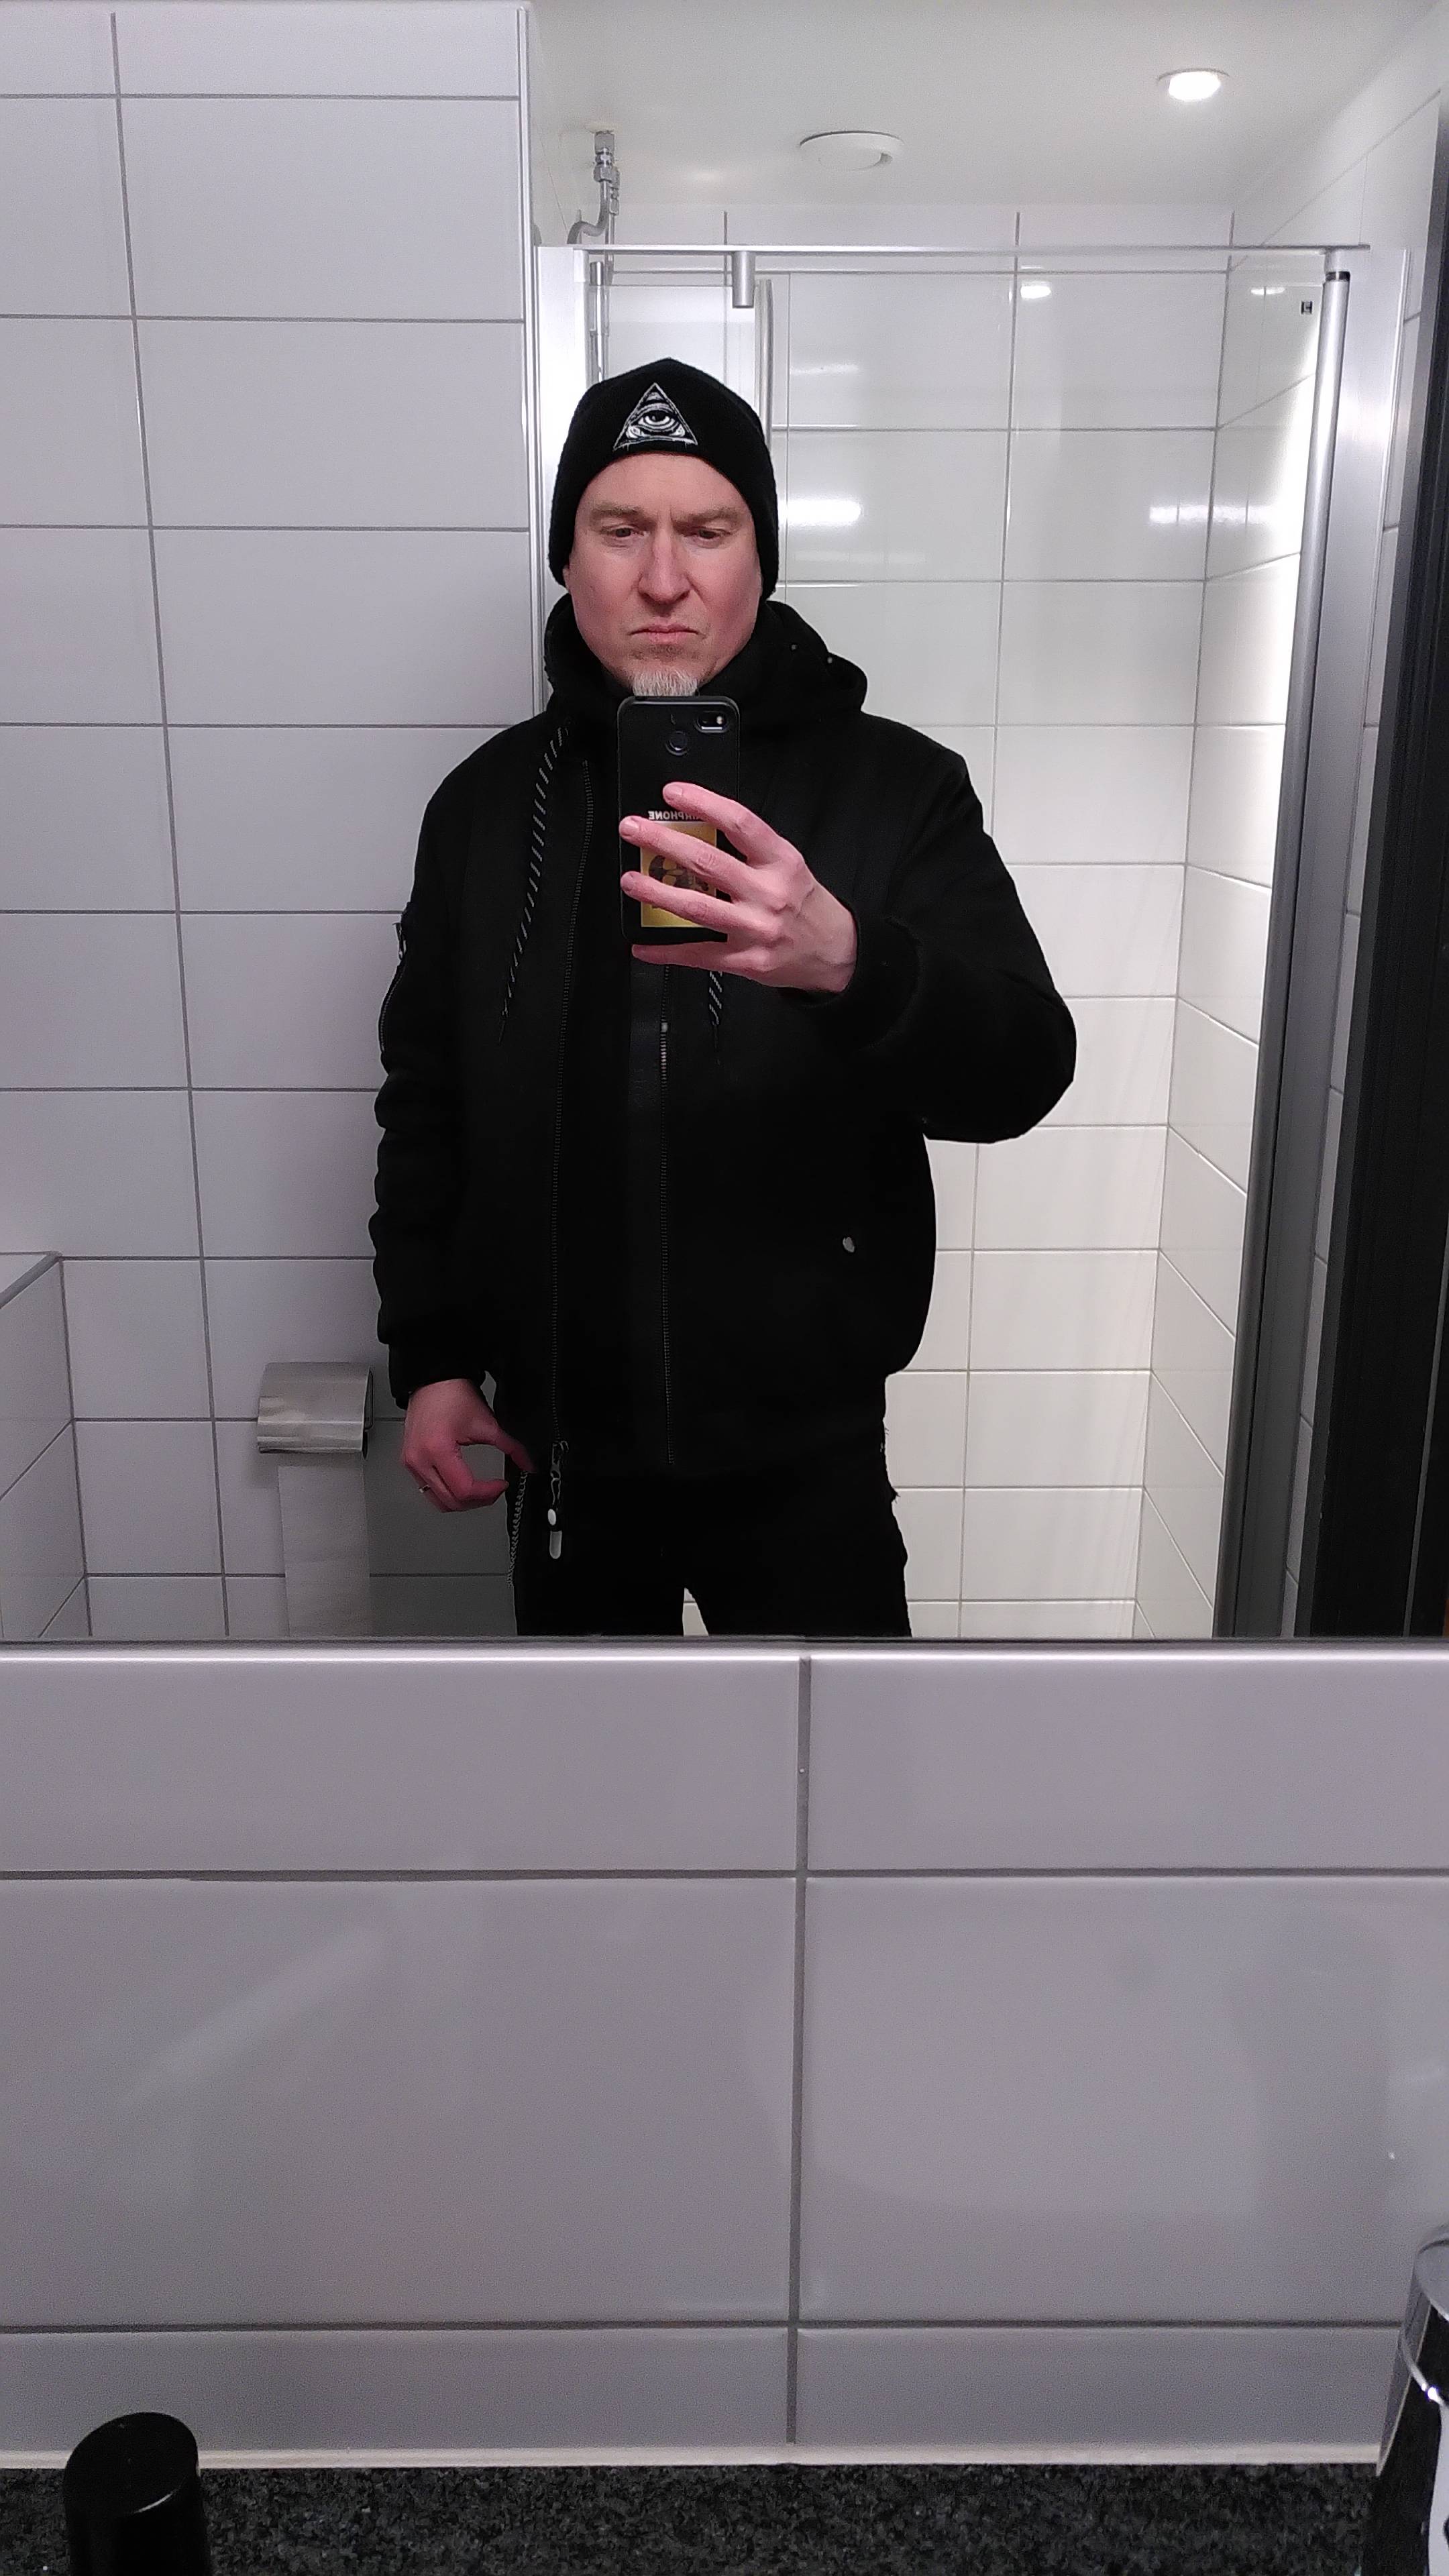 Me, a pale guy with a white goatee, dressed in black with a black bomber and black beanie, as seen in a bathroom mirror.